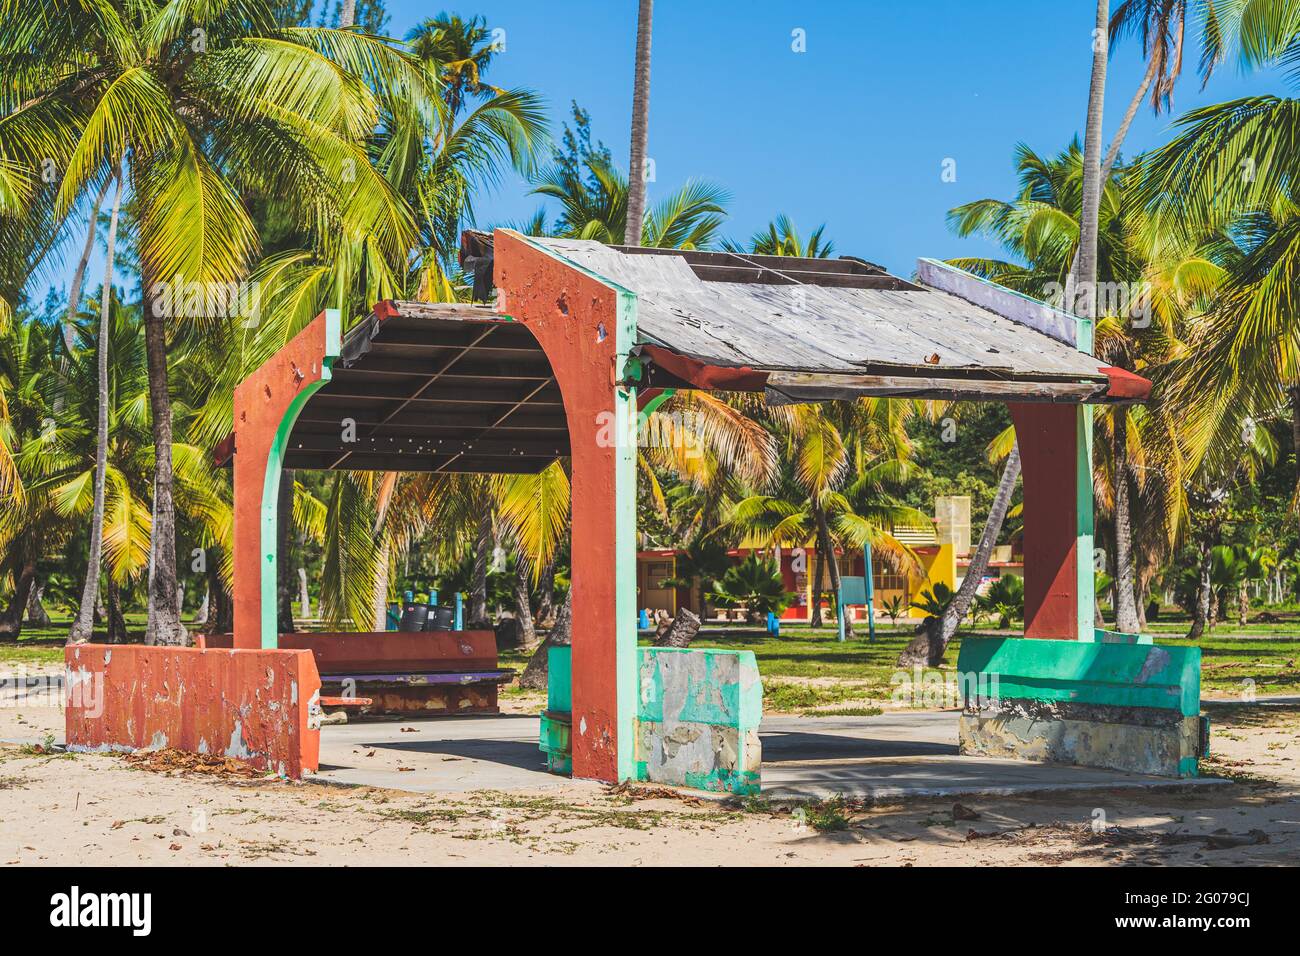 Depilated building damaged from hurricane on tropical beach park Stock Photo